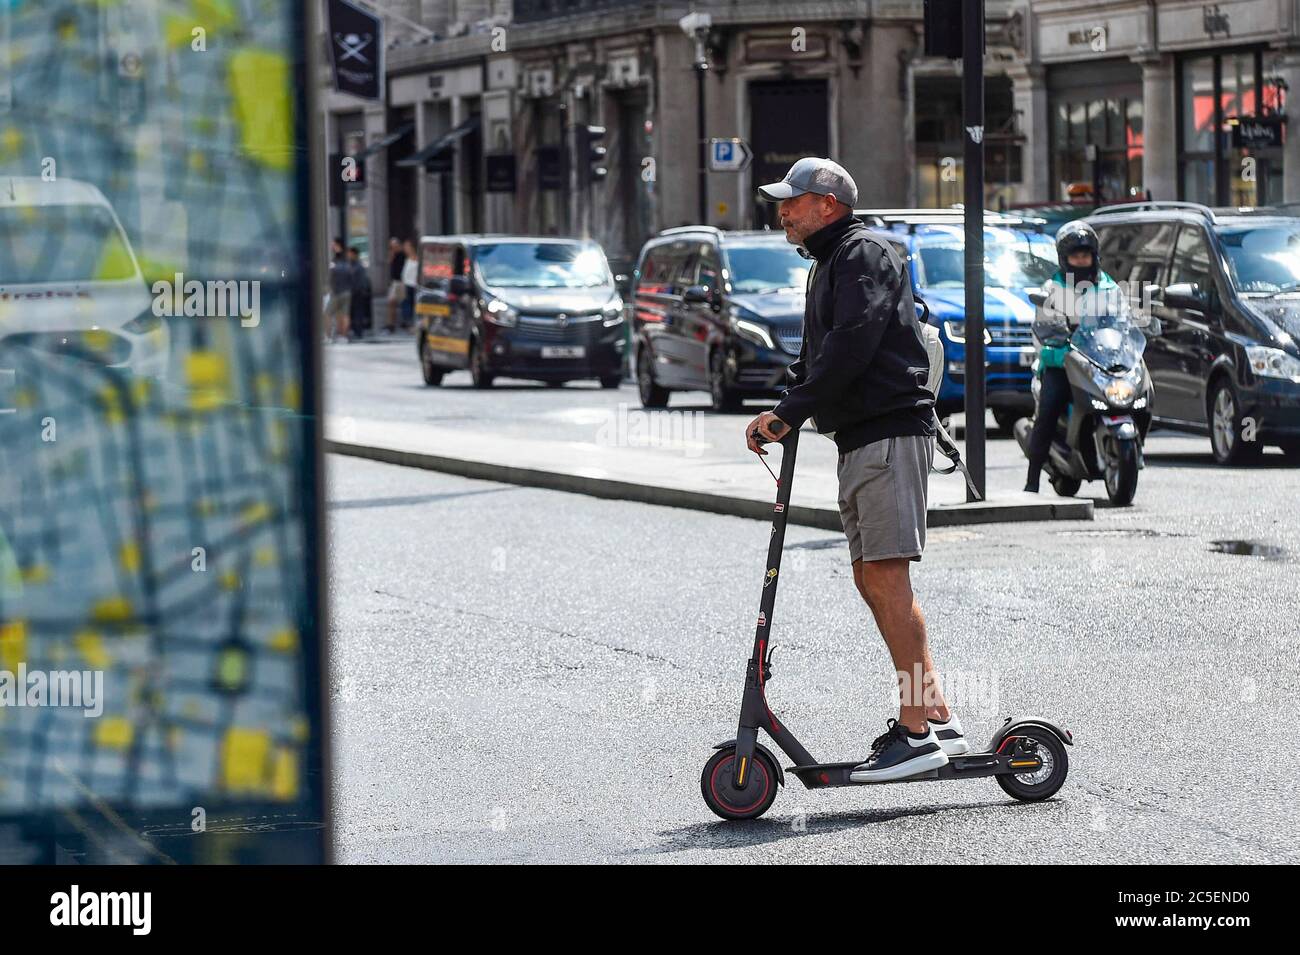 London, UK. 2 July 2020. A man rides a personal electric scooter (e-scooter)  in Regent Street. The Department of Transport will allow rental e-scooters  to become legal on roads in Great Britain